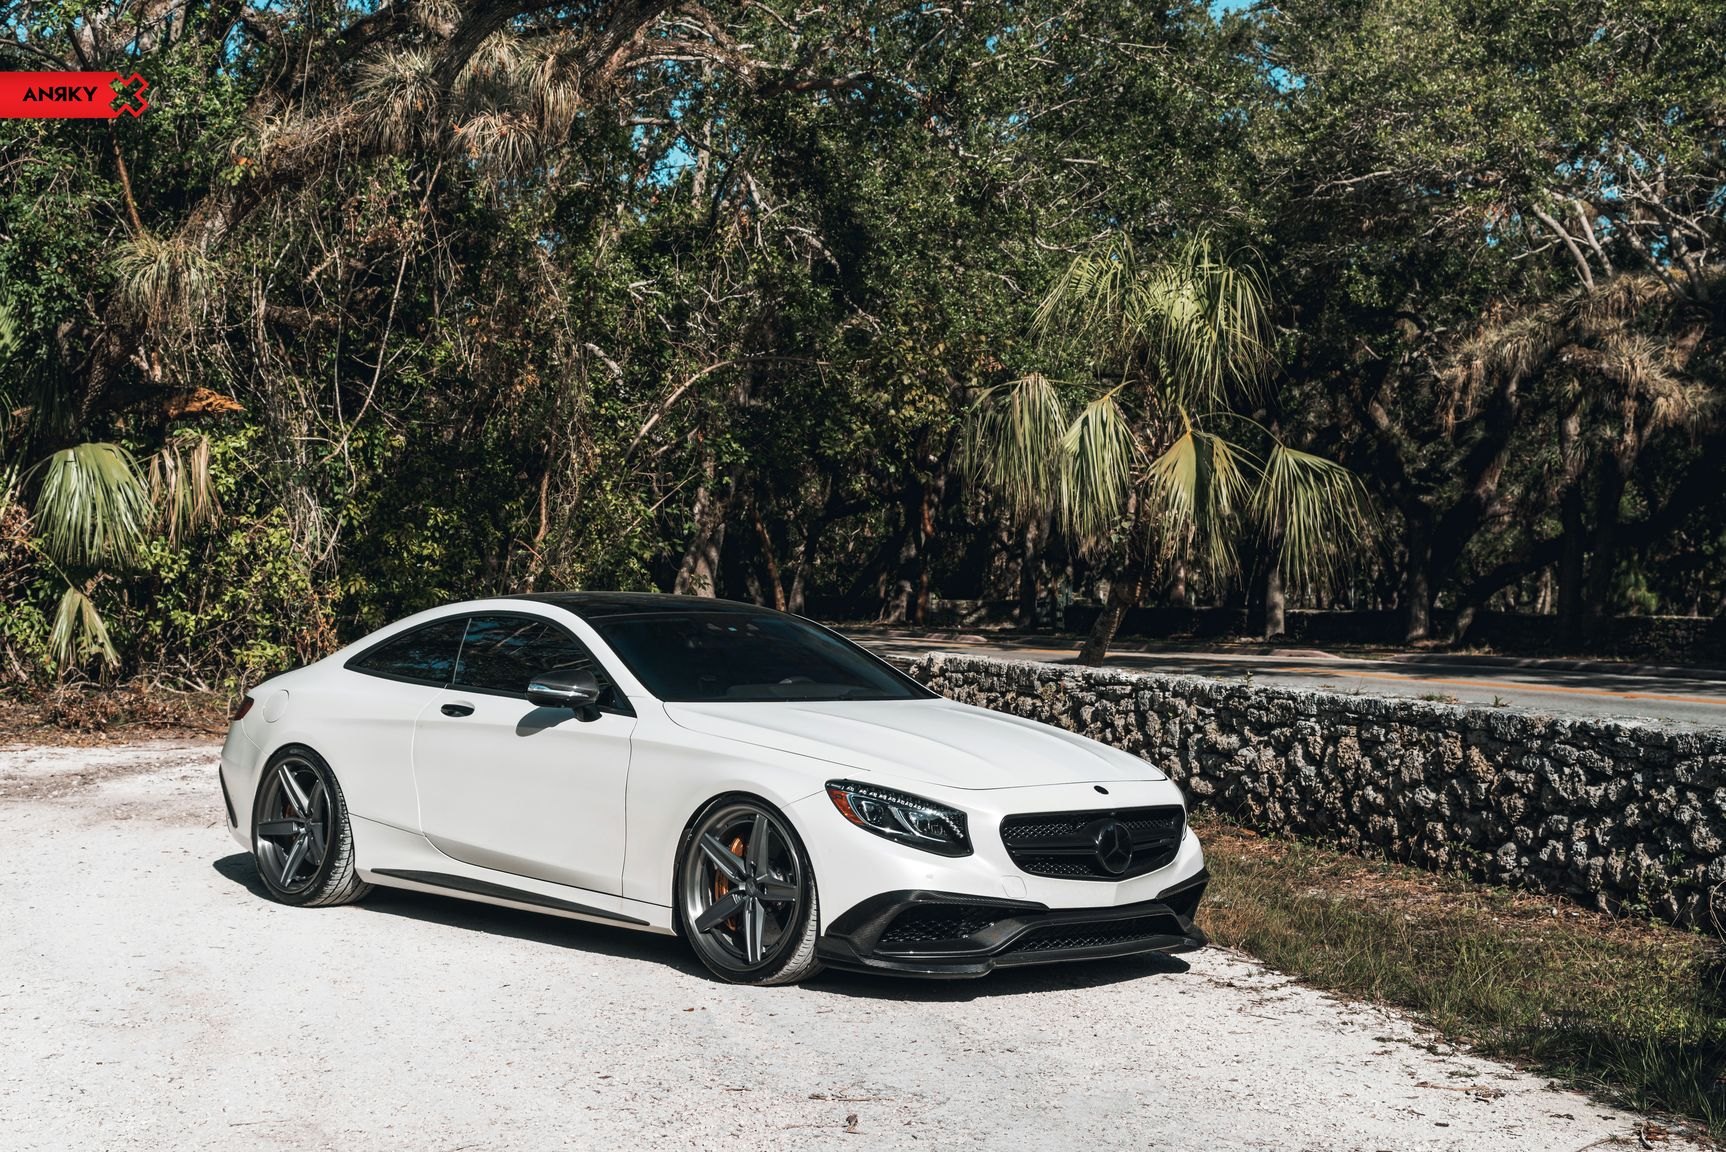 Gunmetal Anrky Wheels on White Mercedes S Class - Photo by Anrky Wheels